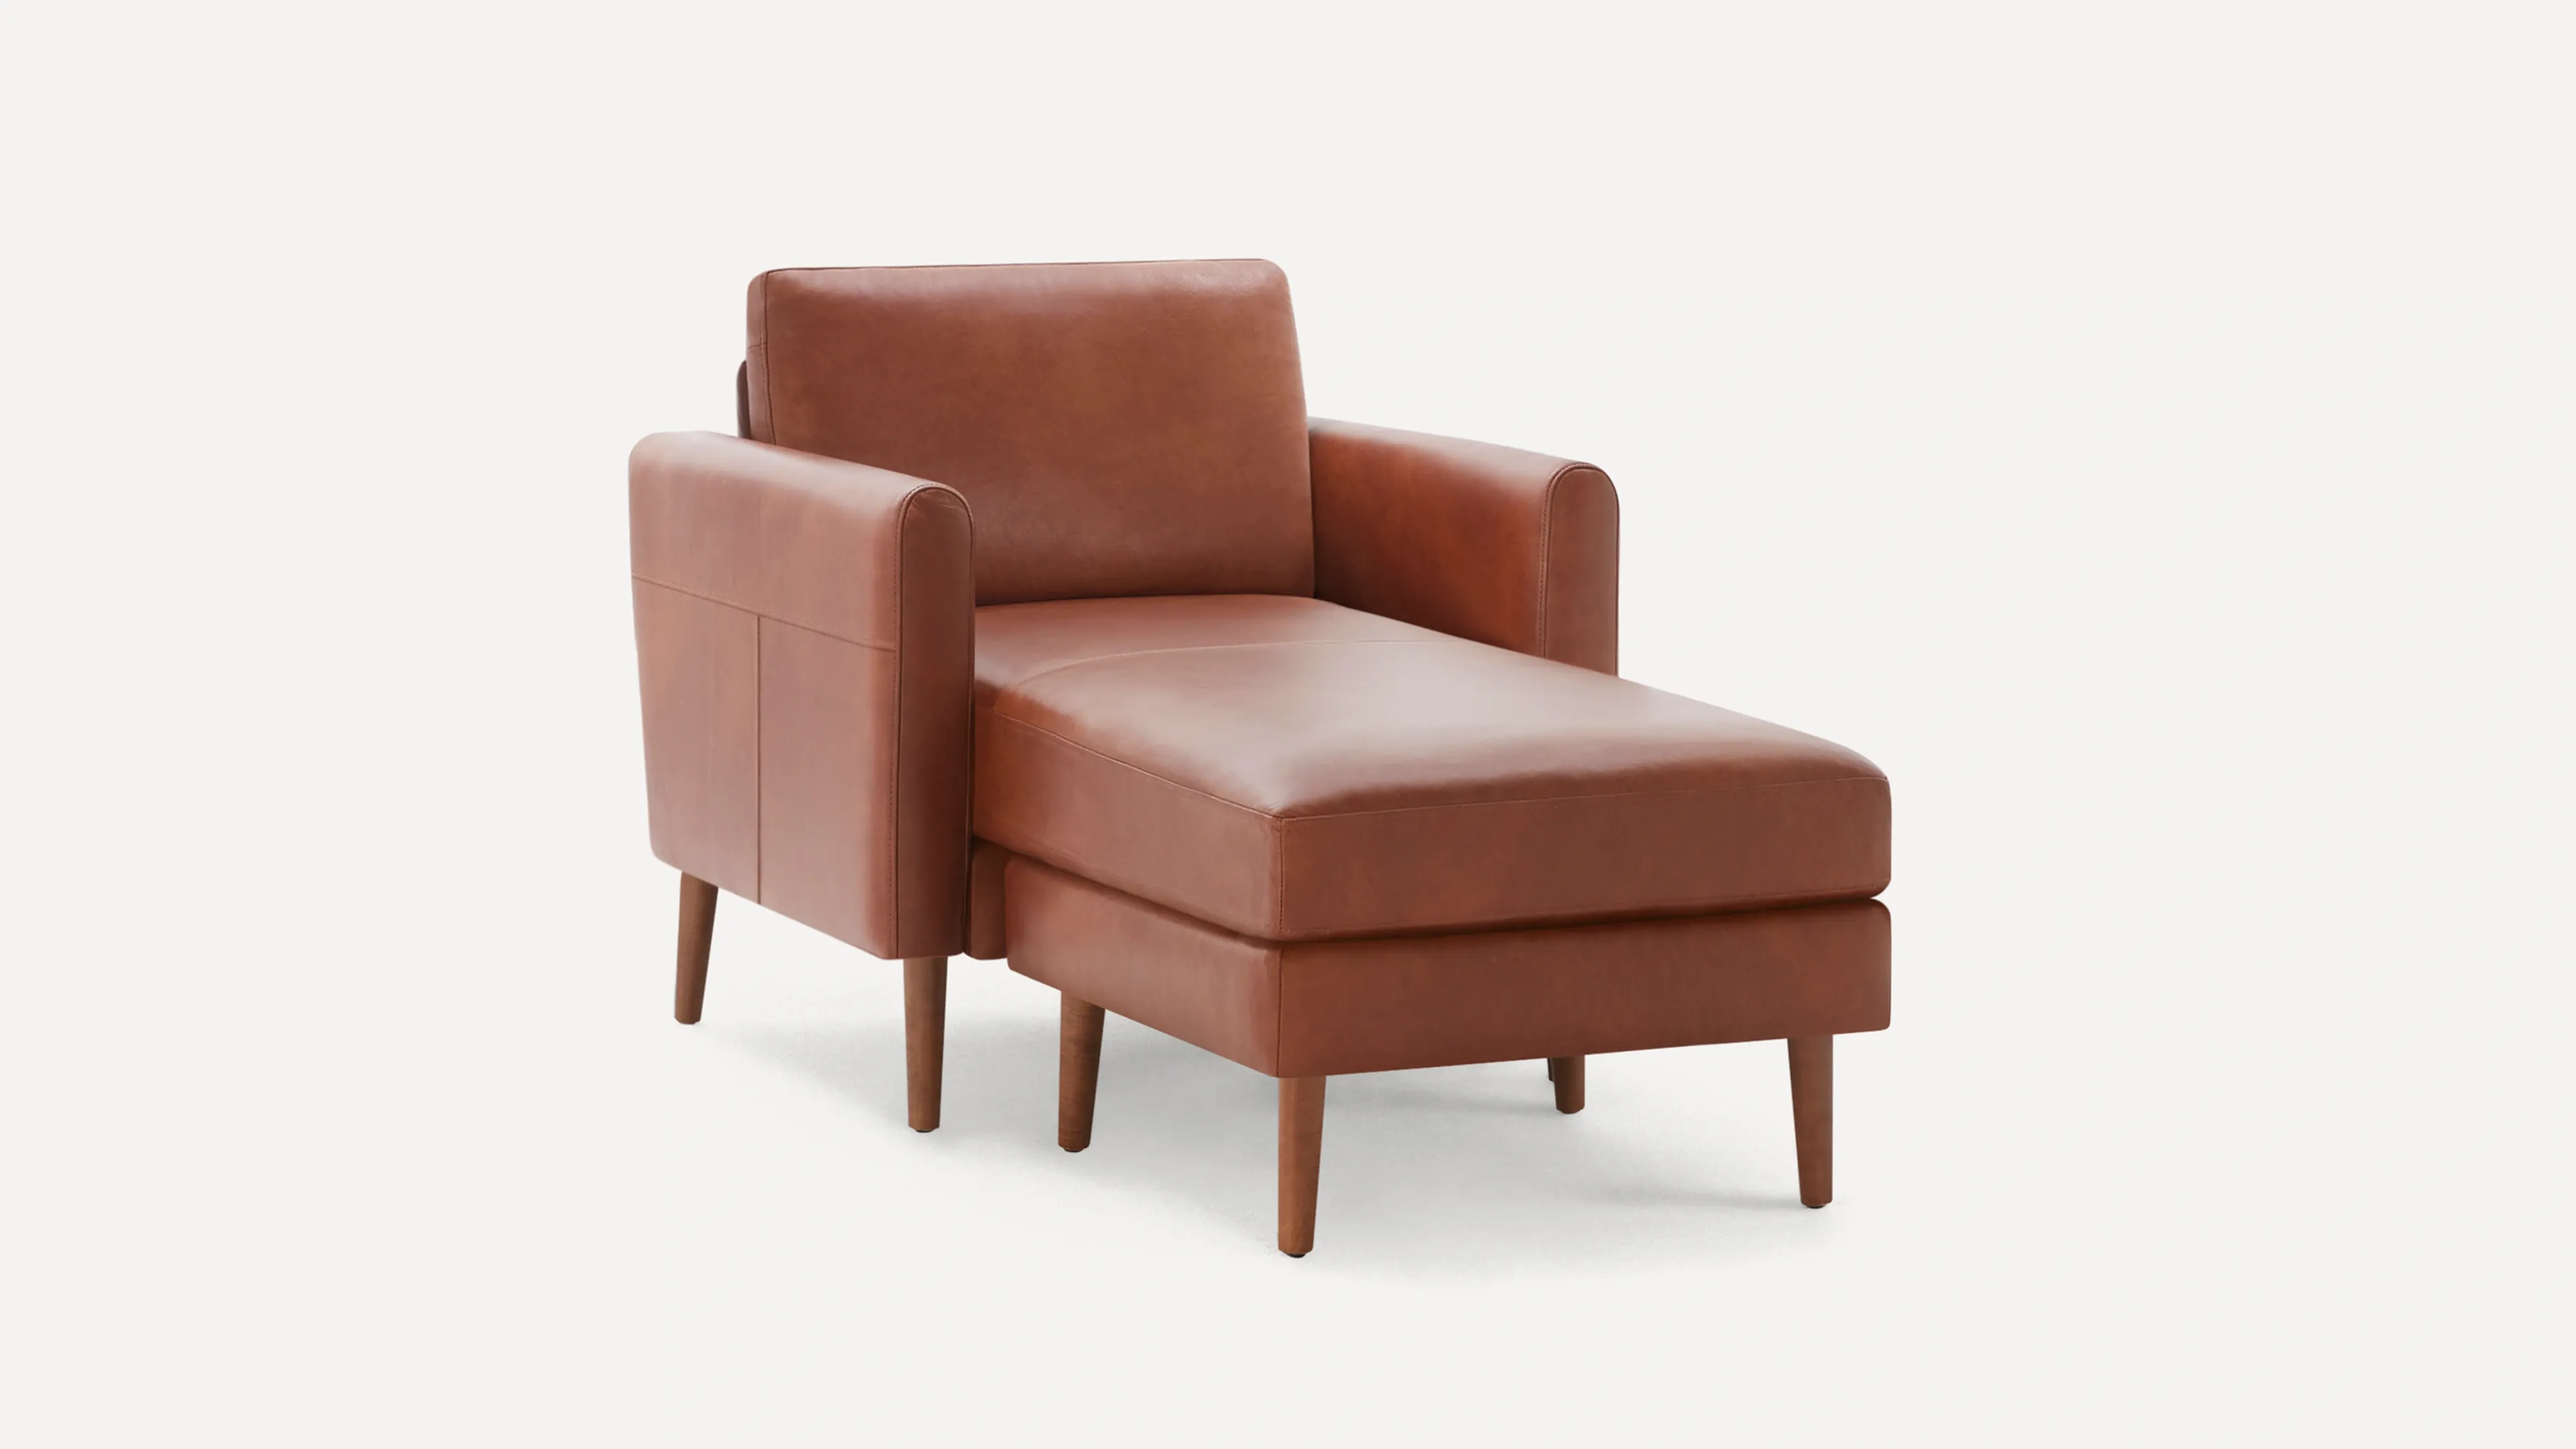 Original Chaise Armchair in Chestnut Leather